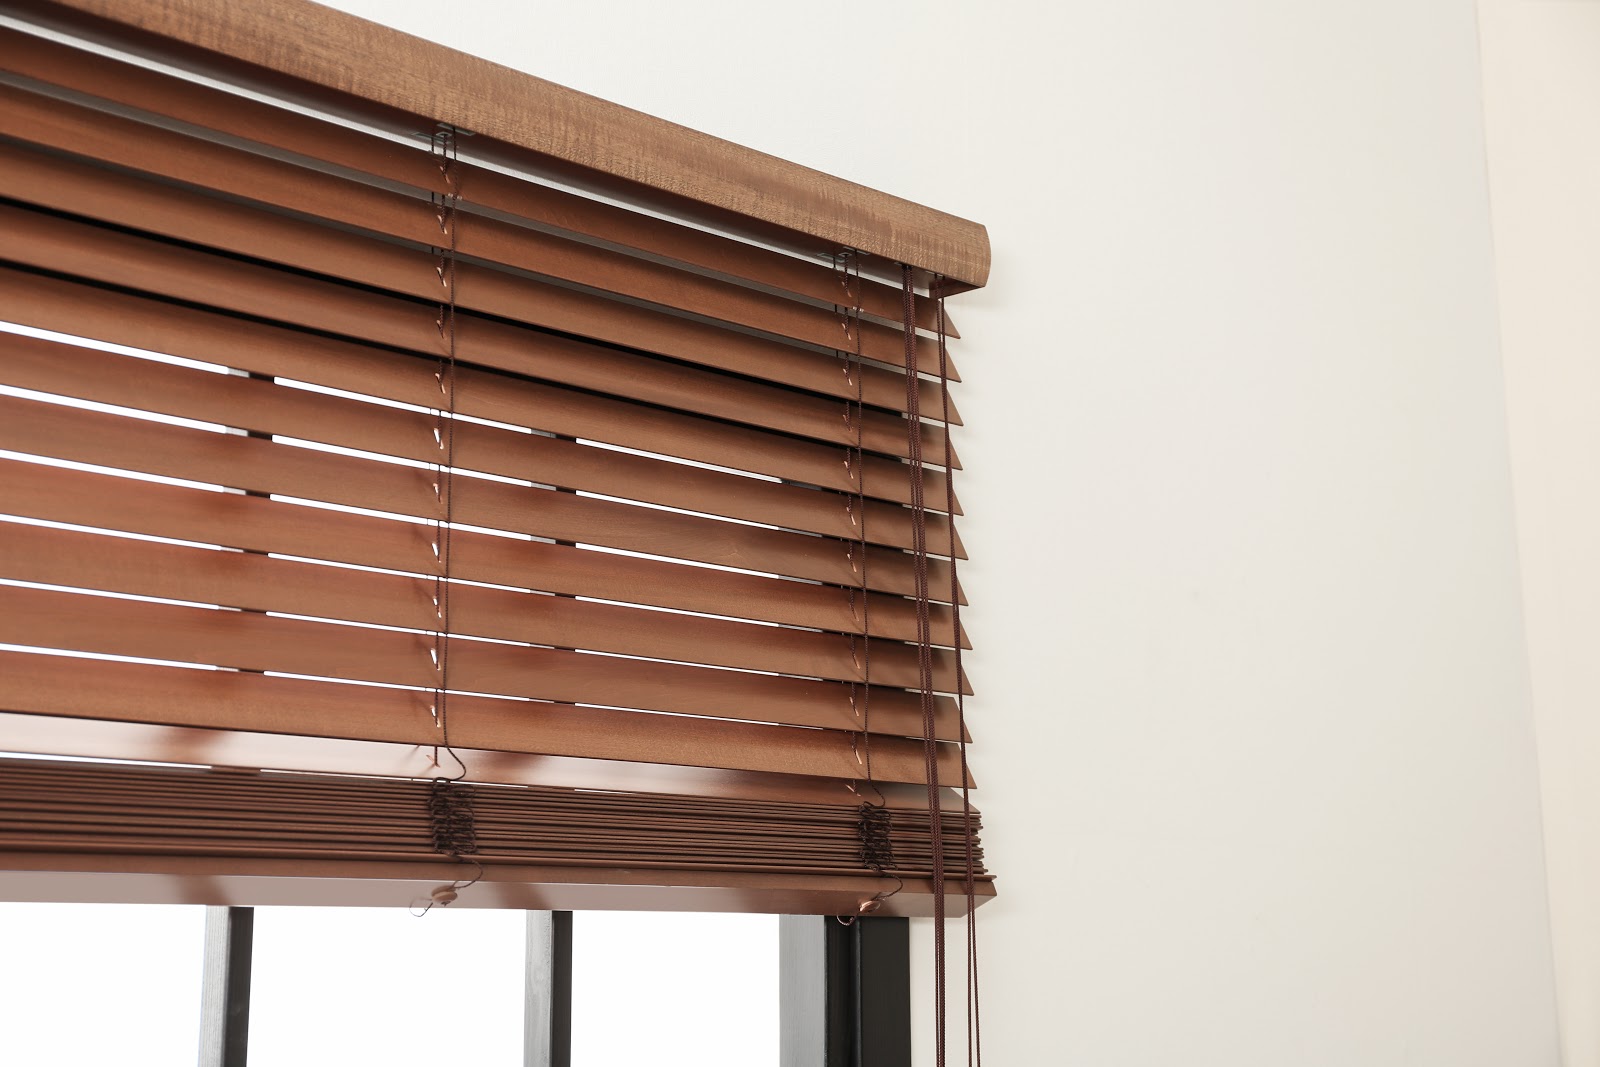 How To Paint Wood Blinds